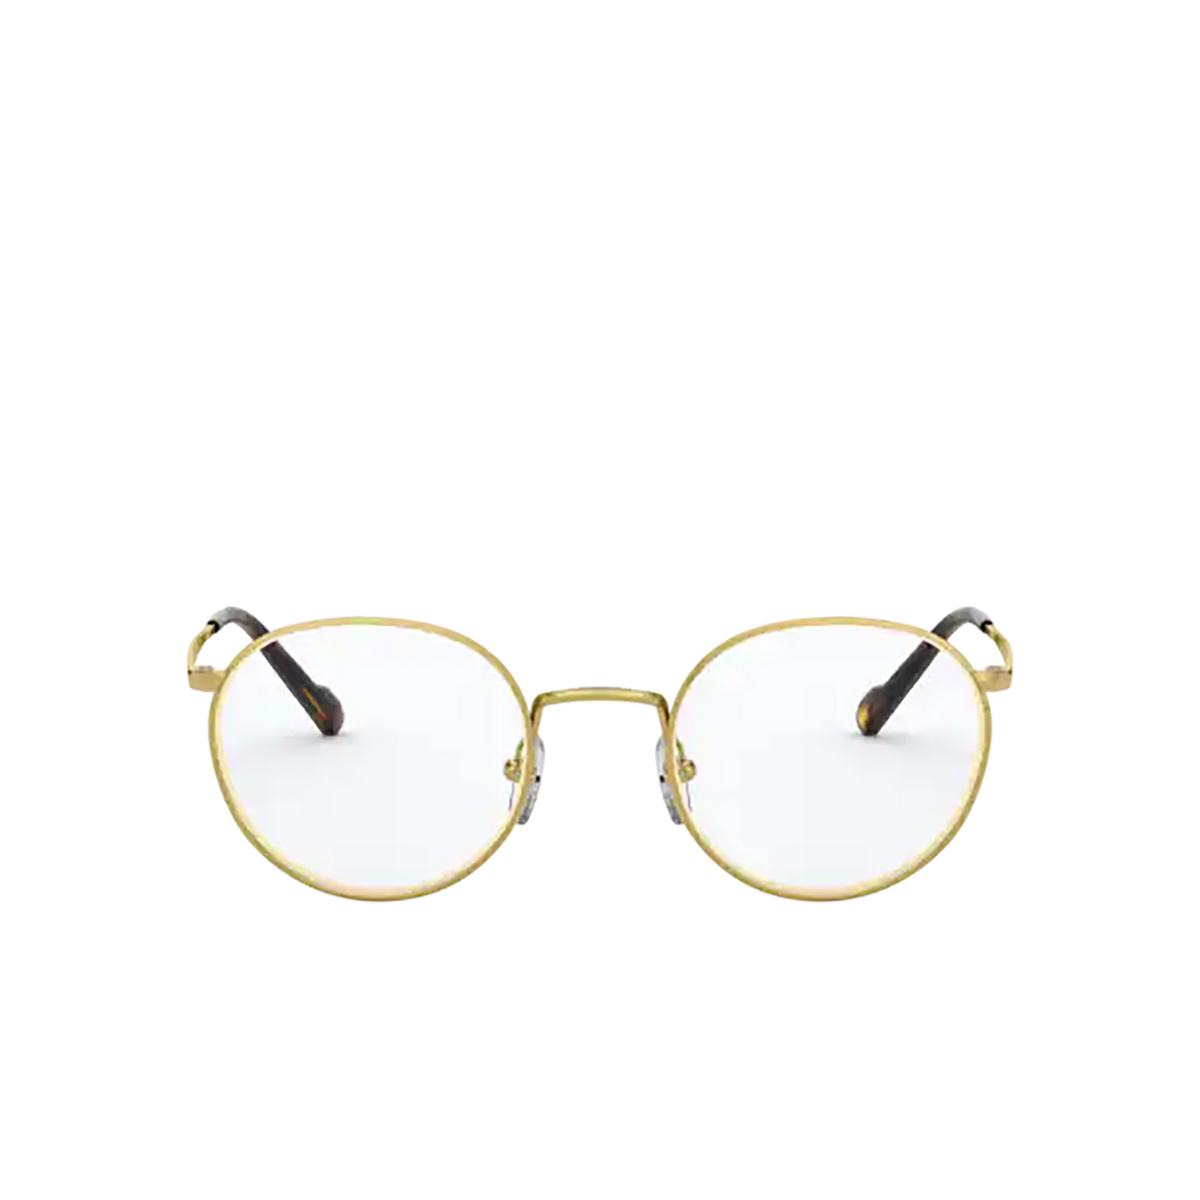 Vogue® Round Eyeglasses: VO4183 color Gold 280 - front view.